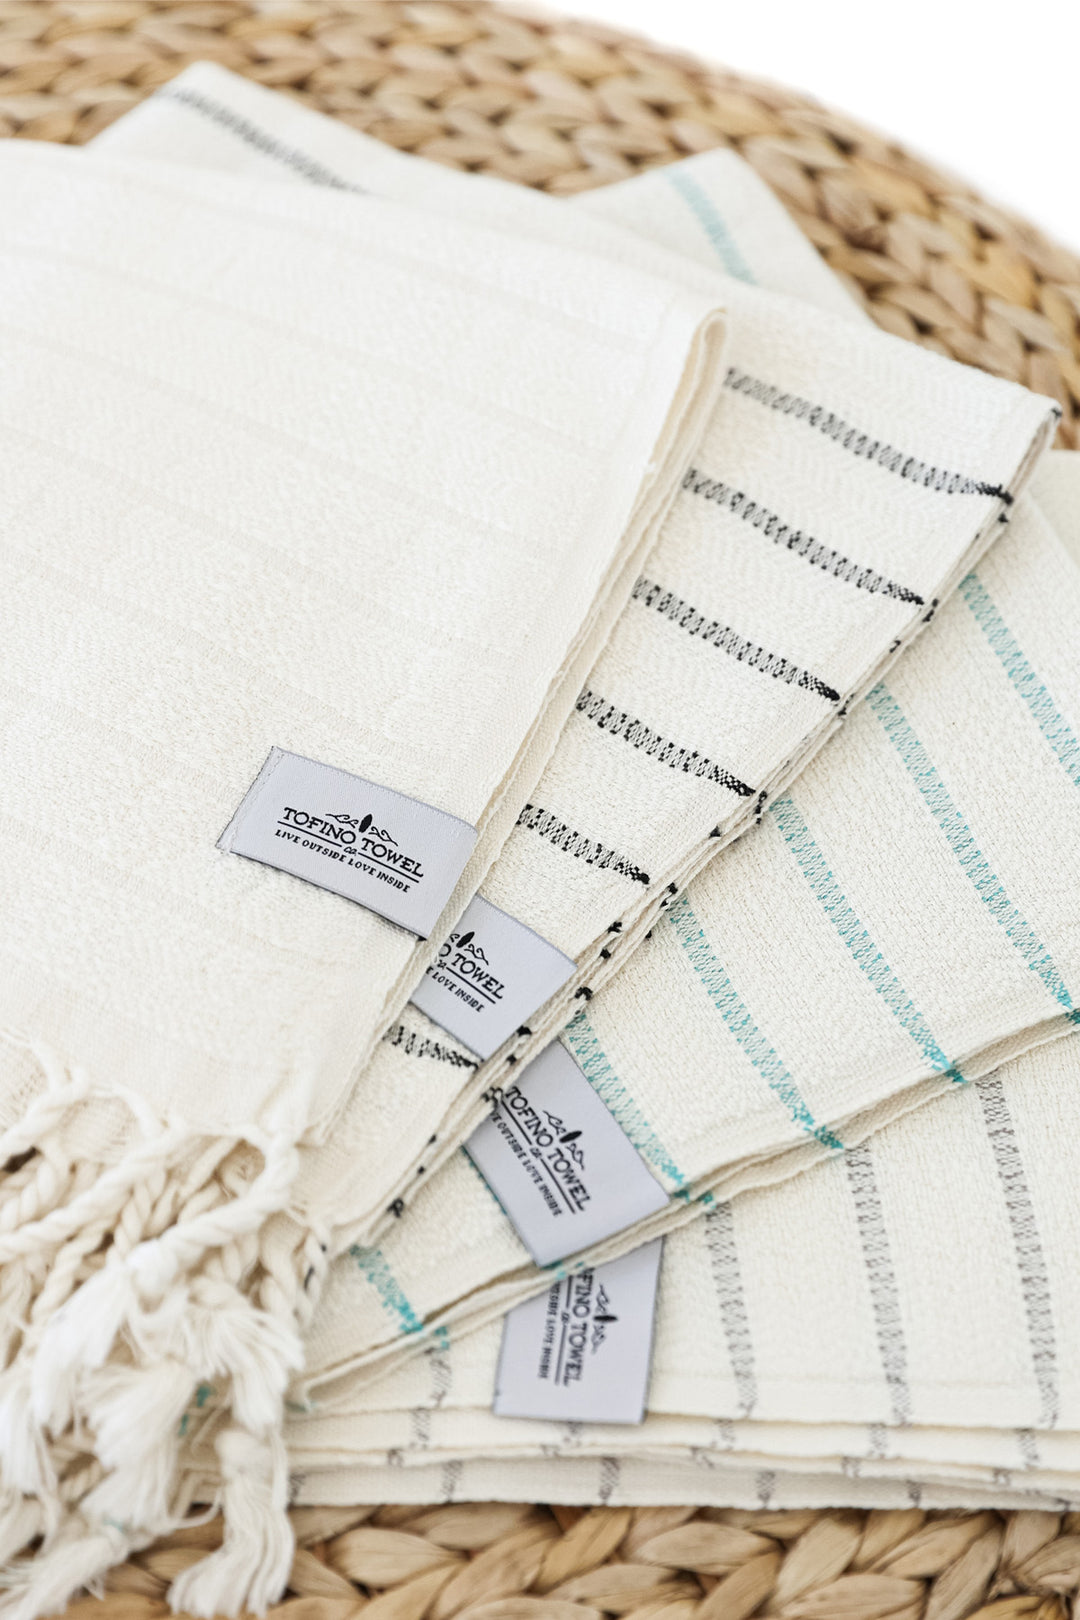 The Willowbrae Hand Towel Series